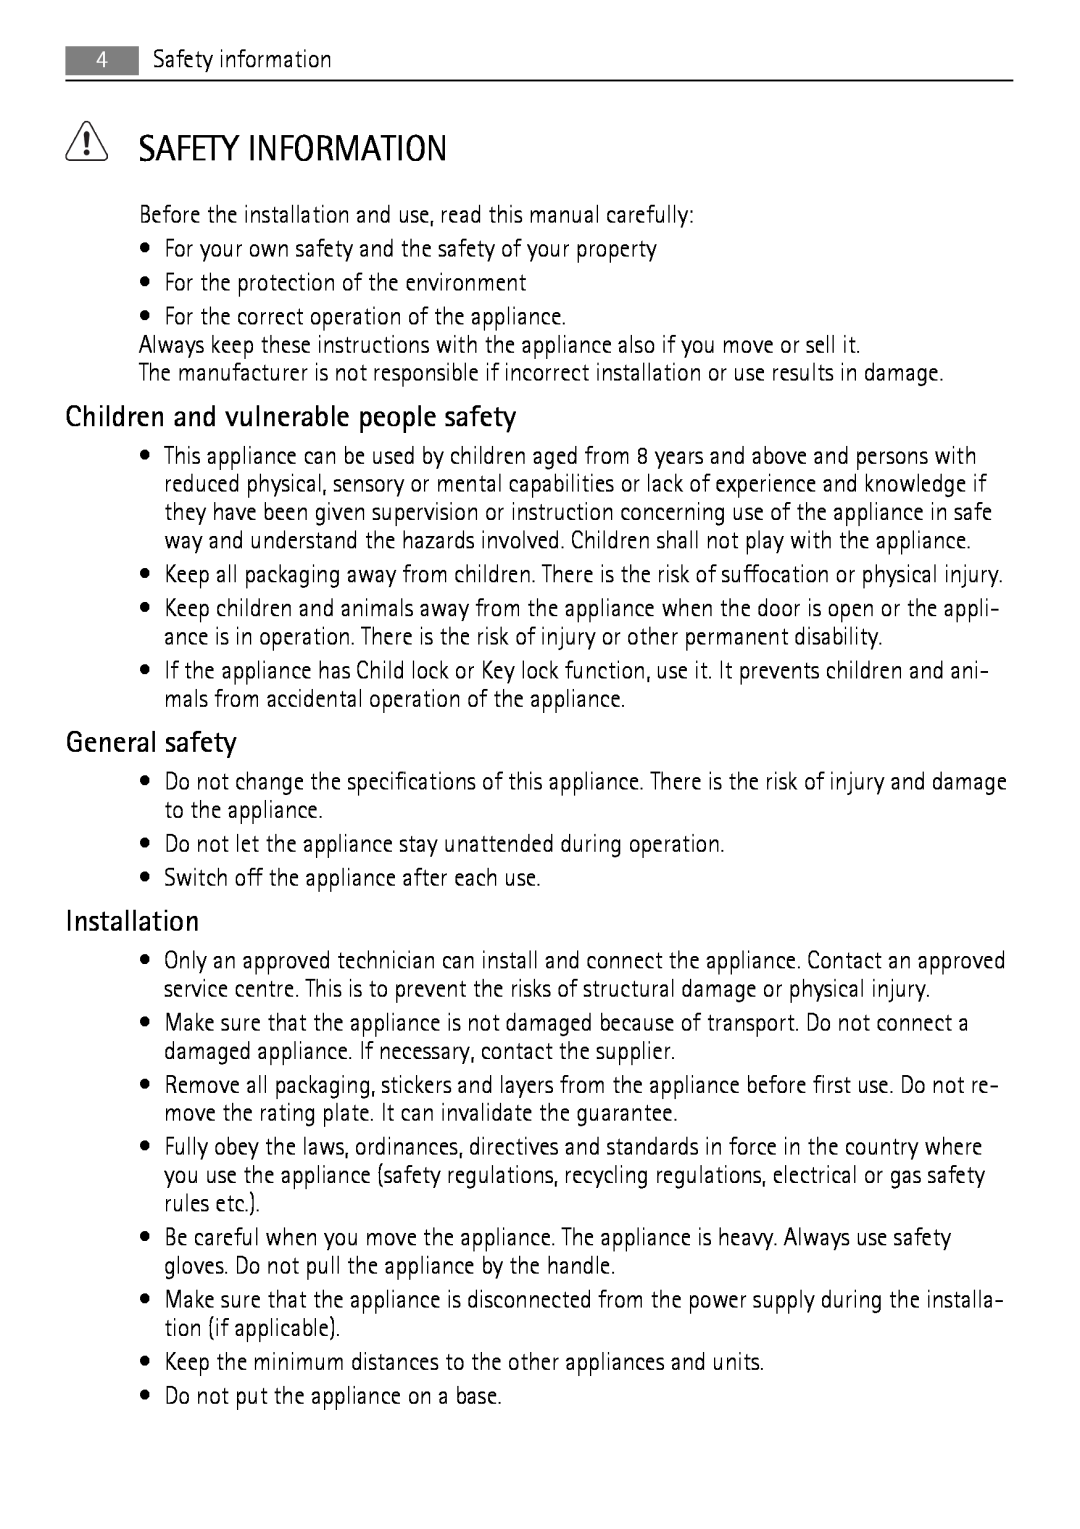 AEG 30006FF user manual Safety Information, Children and vulnerable people safety, General safety, Installation 